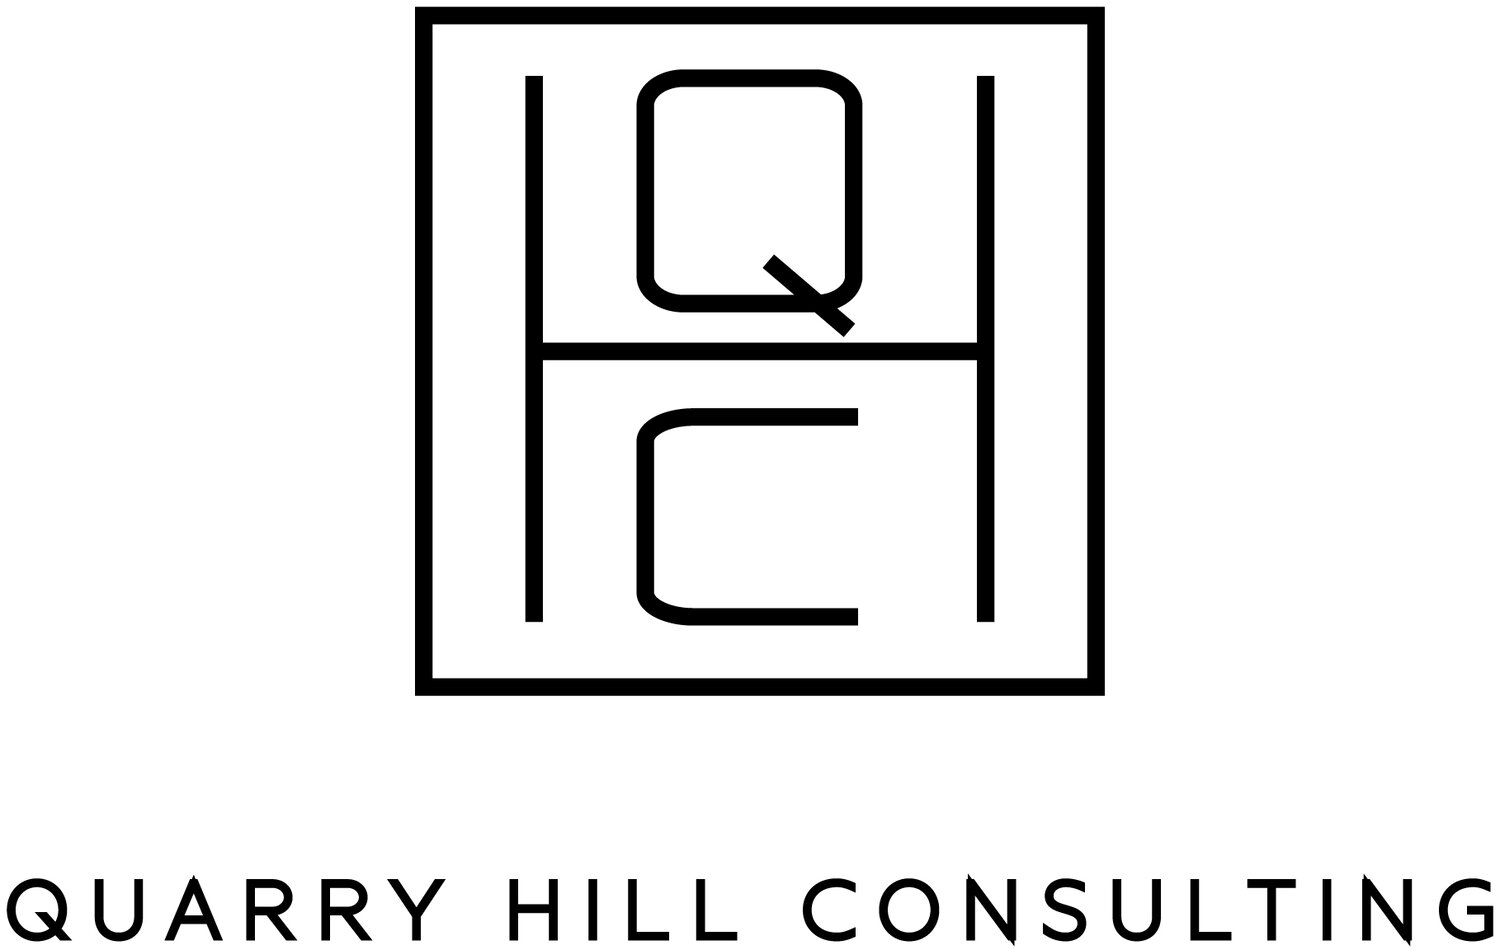 Quarry Hill Consulting